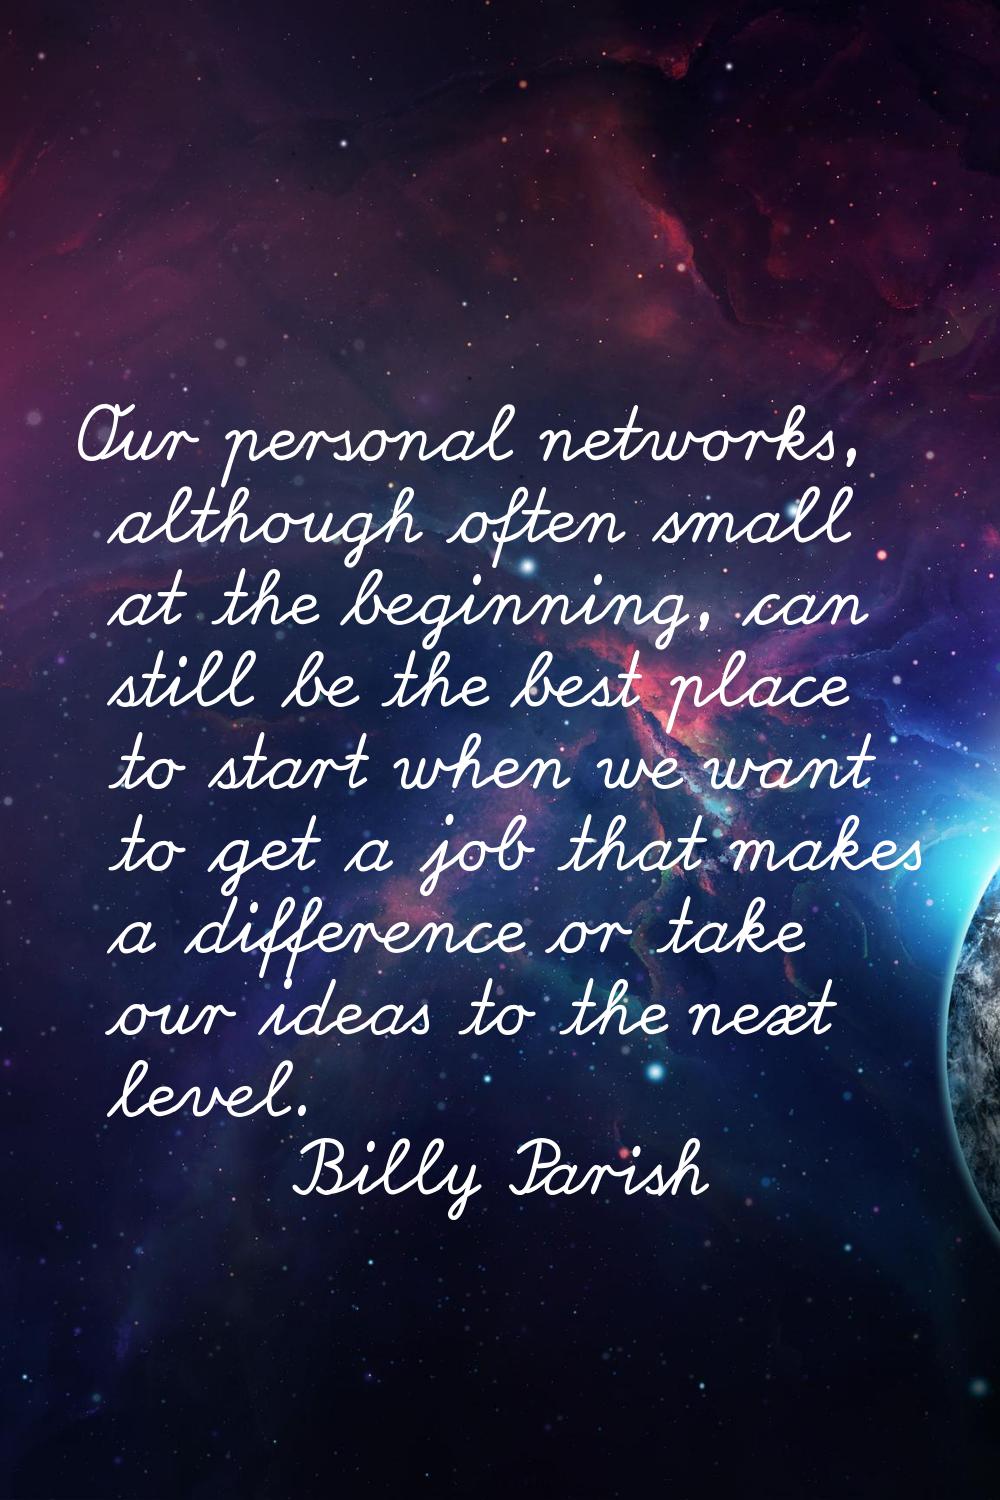 Our personal networks, although often small at the beginning, can still be the best place to start 